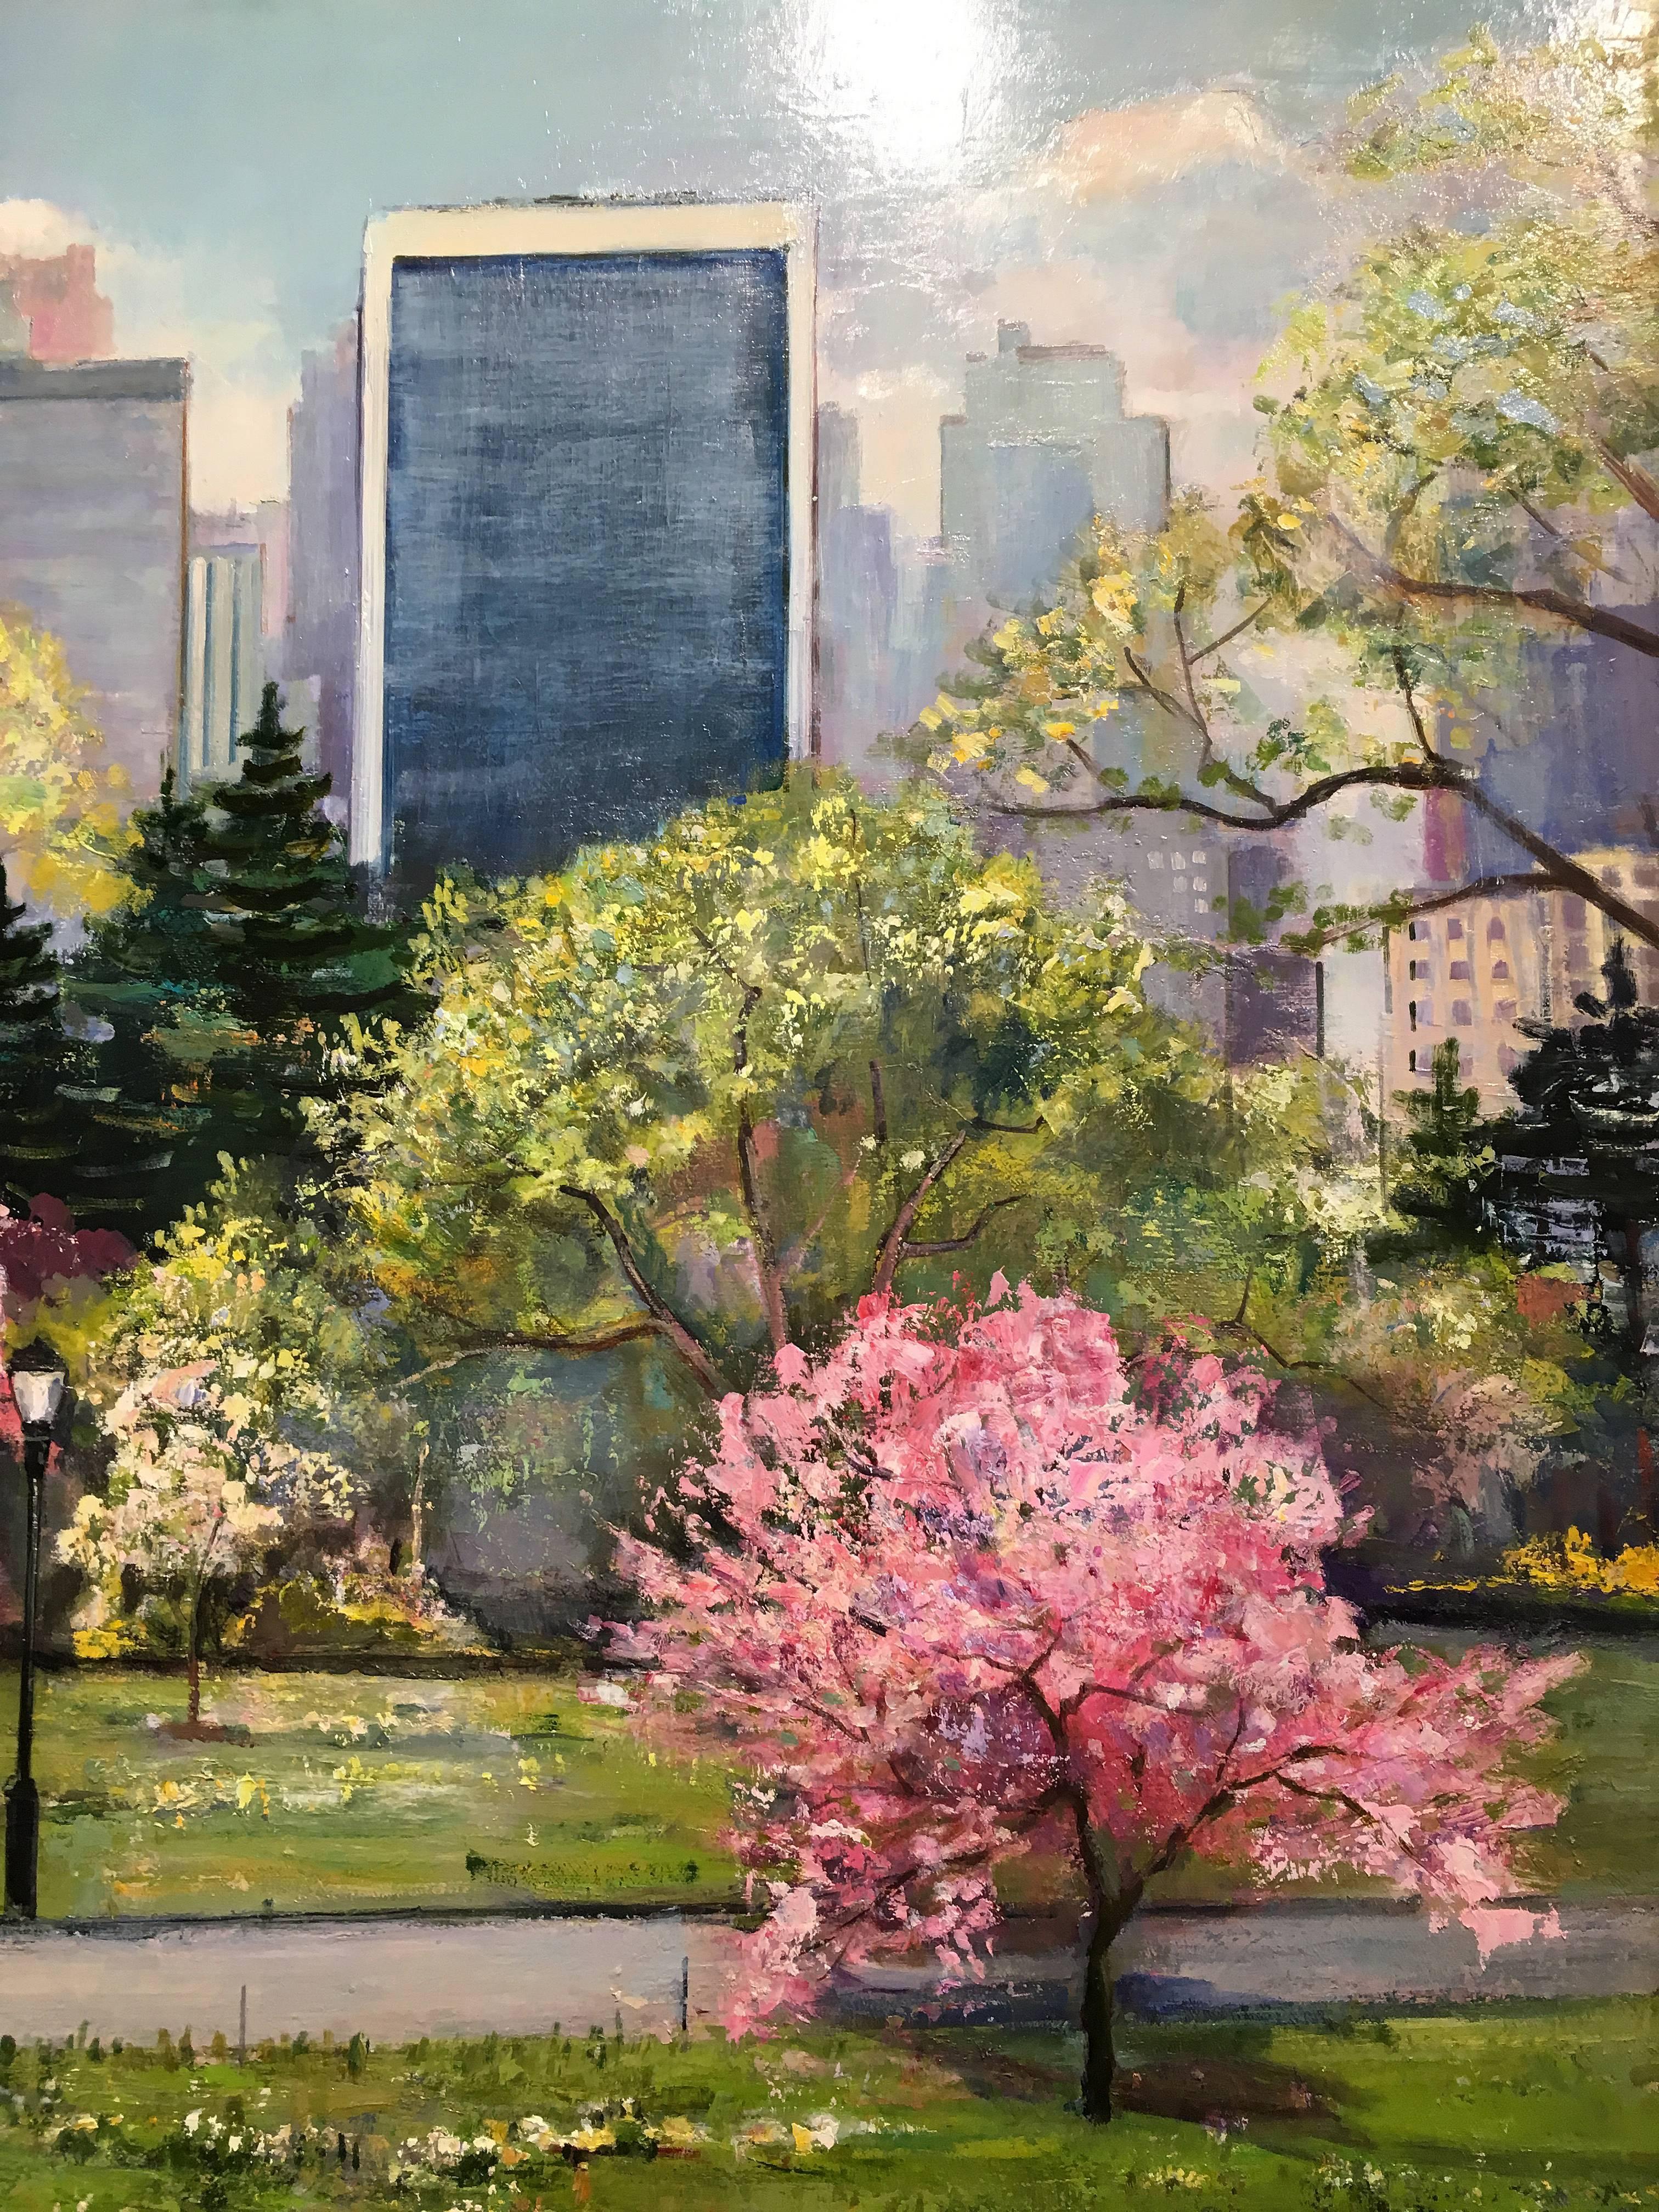 Fruit Trees In Bloom, 2007, by NY artist, Lawrence Kelsey. Oil on canvas, 32 x 34 inches. This painting depicts a view of fruit trees at Central Park in New York City during ta Spring month. The artist incorporates a pastel palette of green, blue,